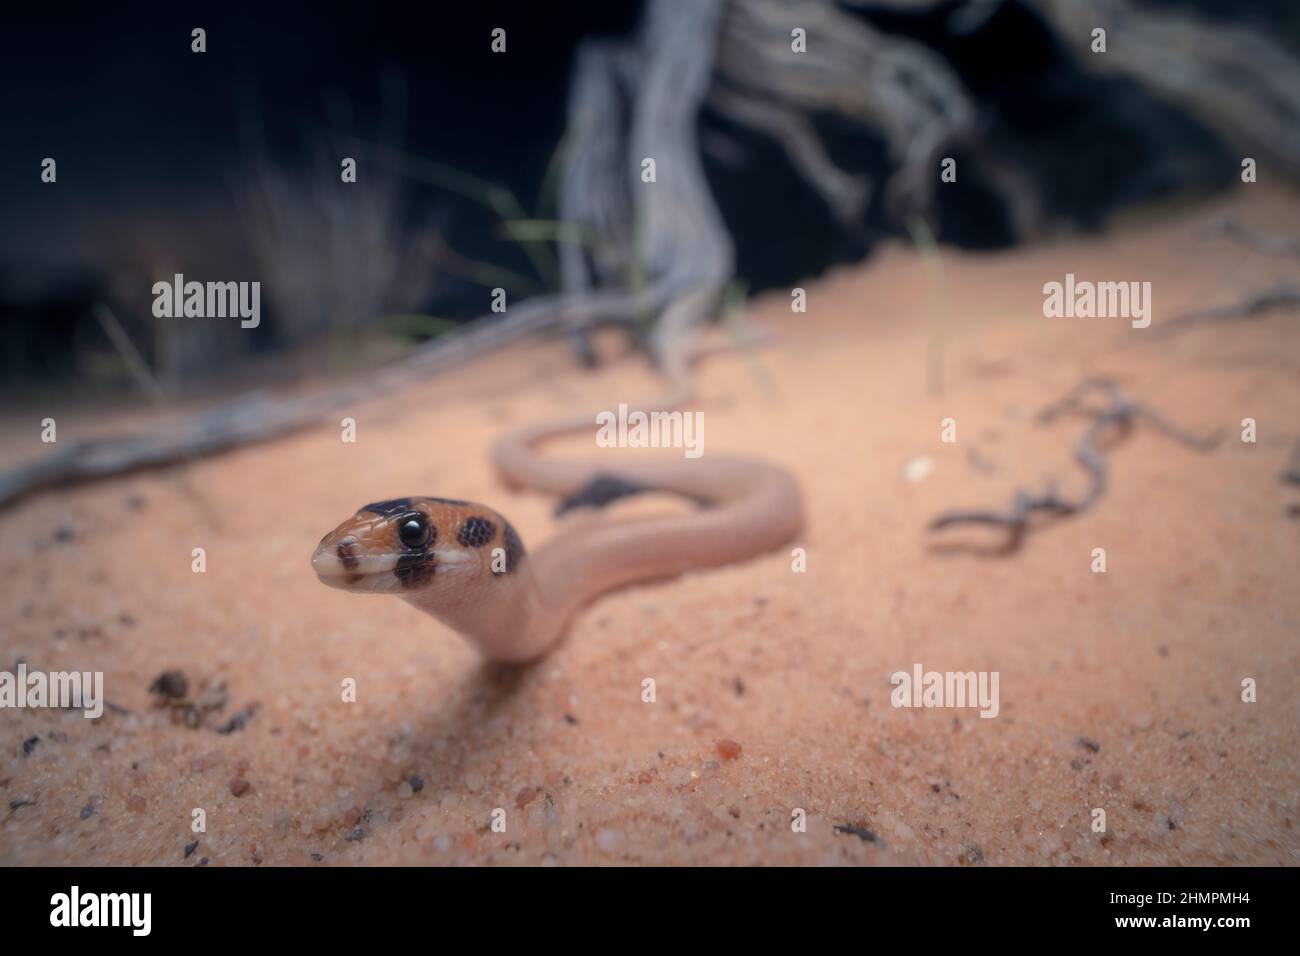 Hooded scaly-foot lizard (Pygopus nigriceps) in sand dunes at night, Australia Stock Photo